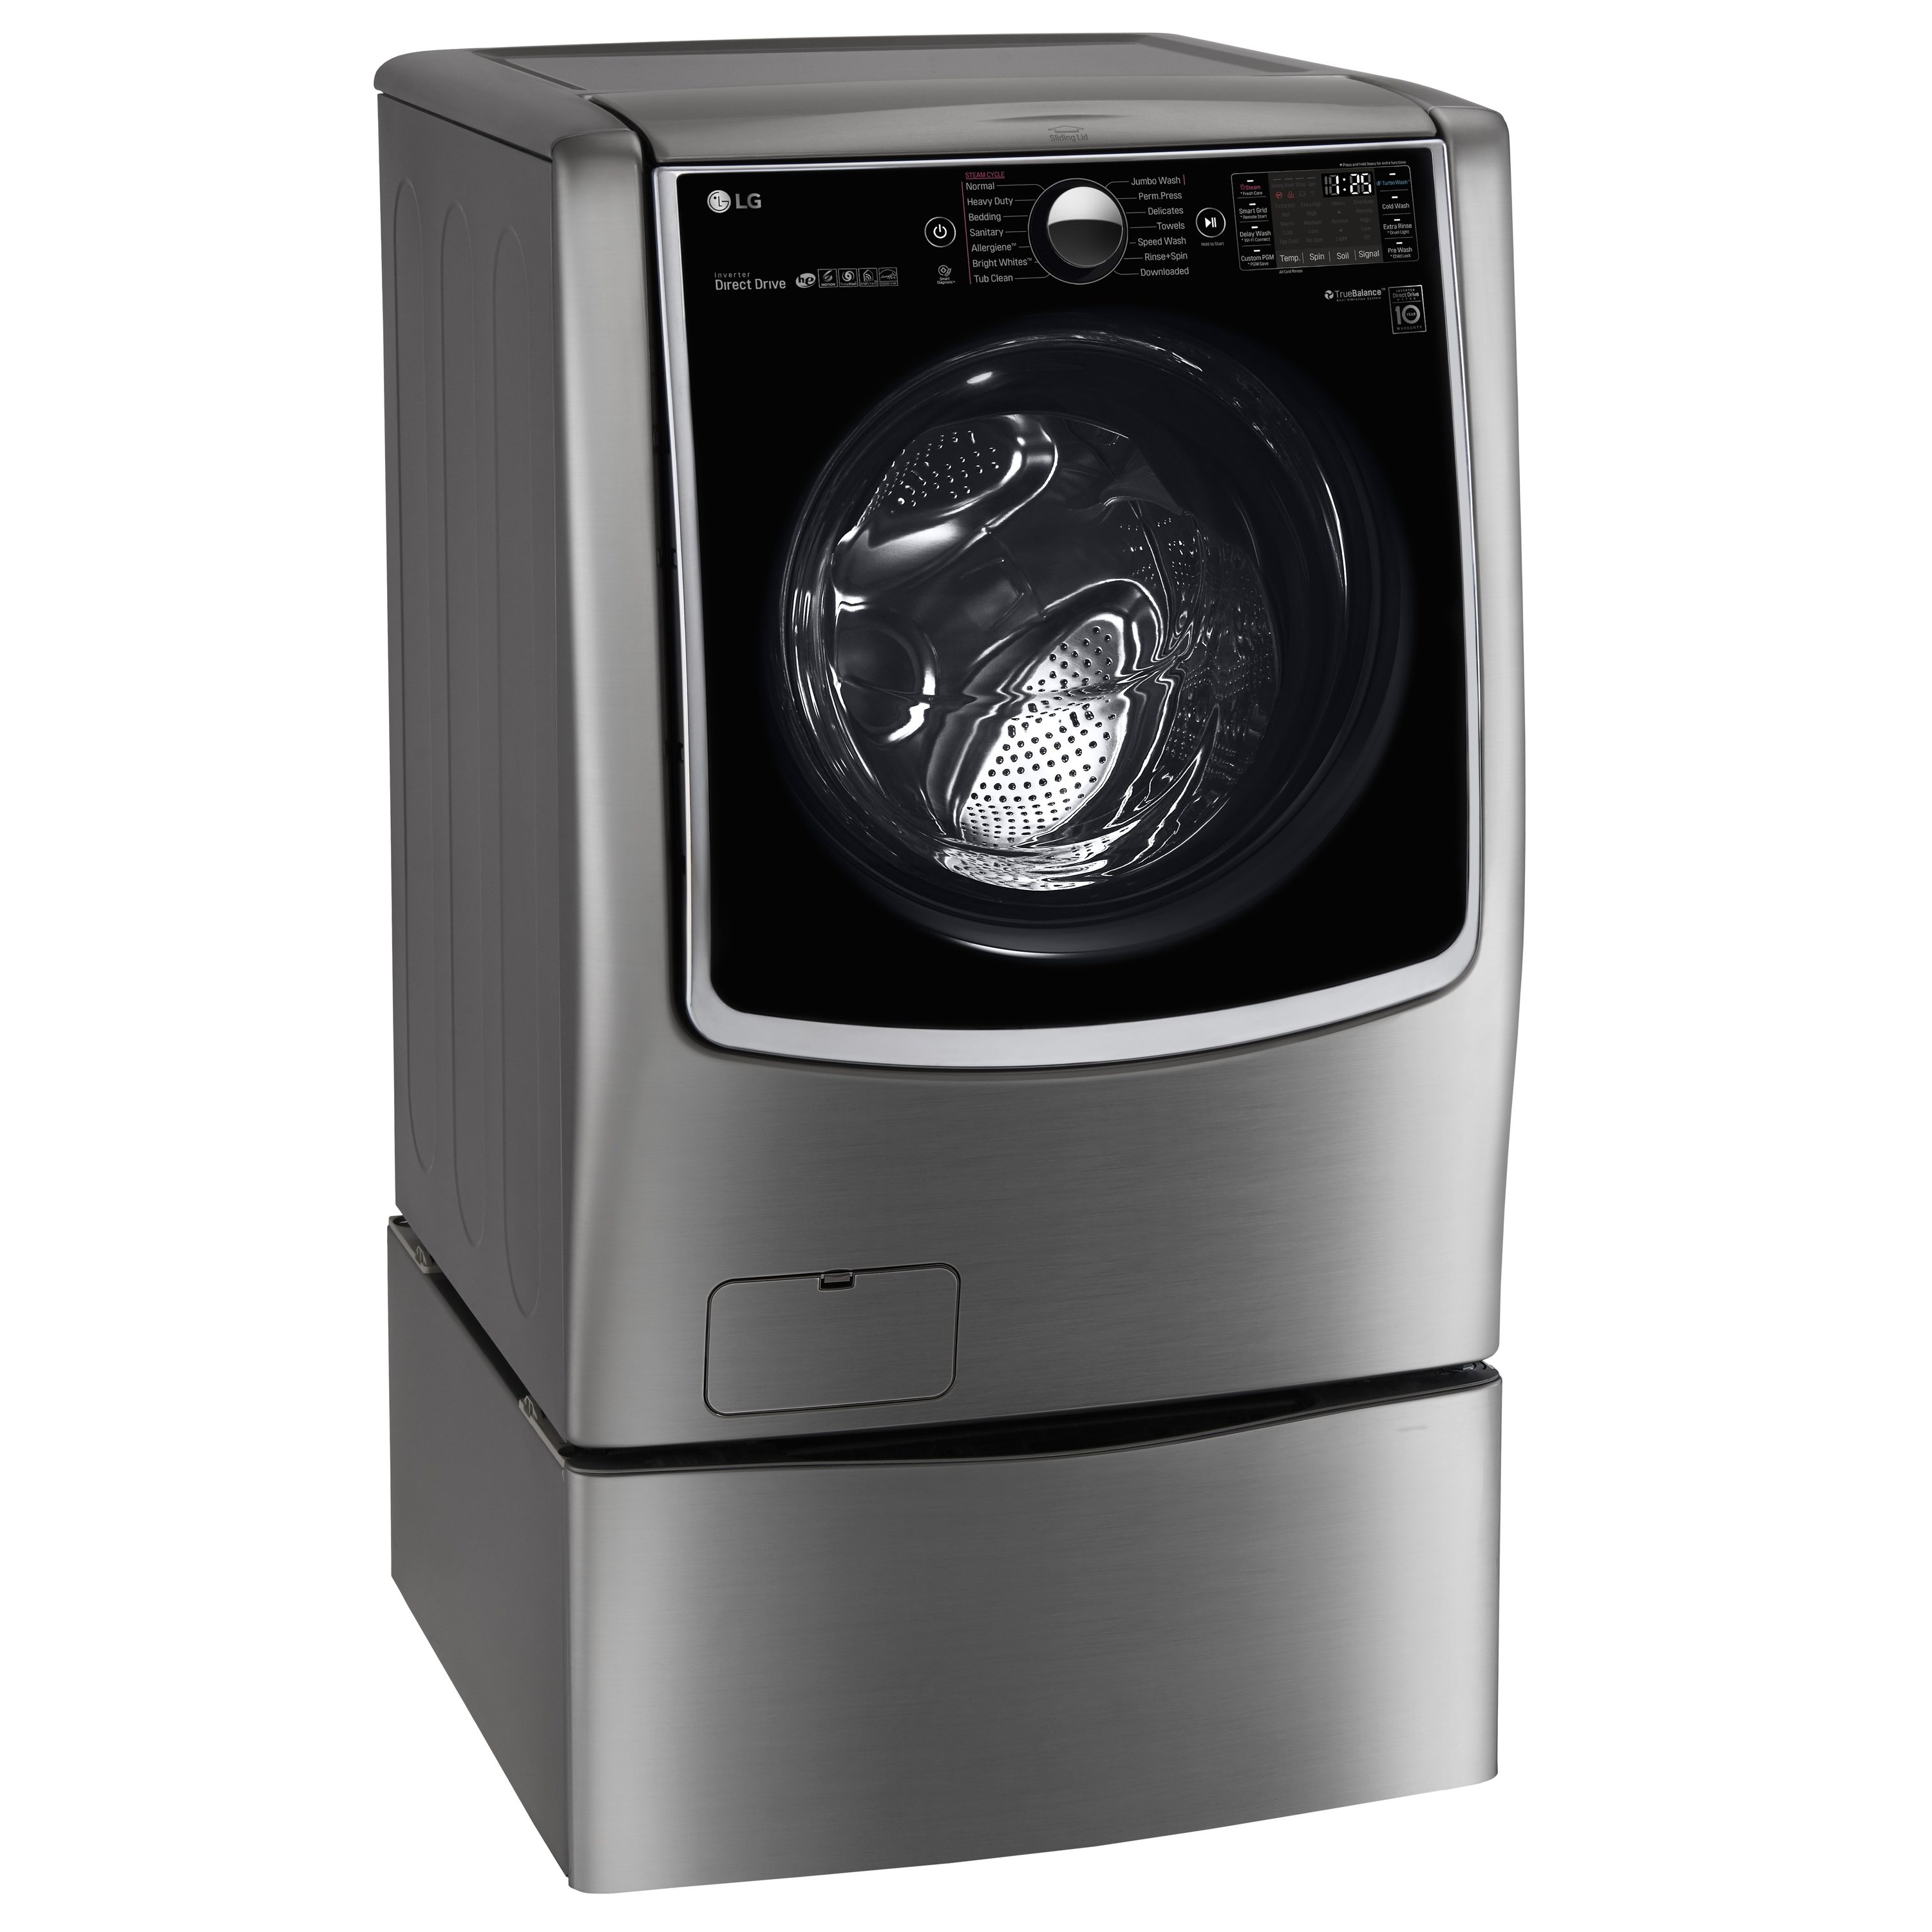 LG TWINWash Smart Wi-Fi Enabled 5.2-cu ft High Efficiency Stackable Steam Cycle Smart Front-Load Washer (Graphite Steel) ENERGY STAR at